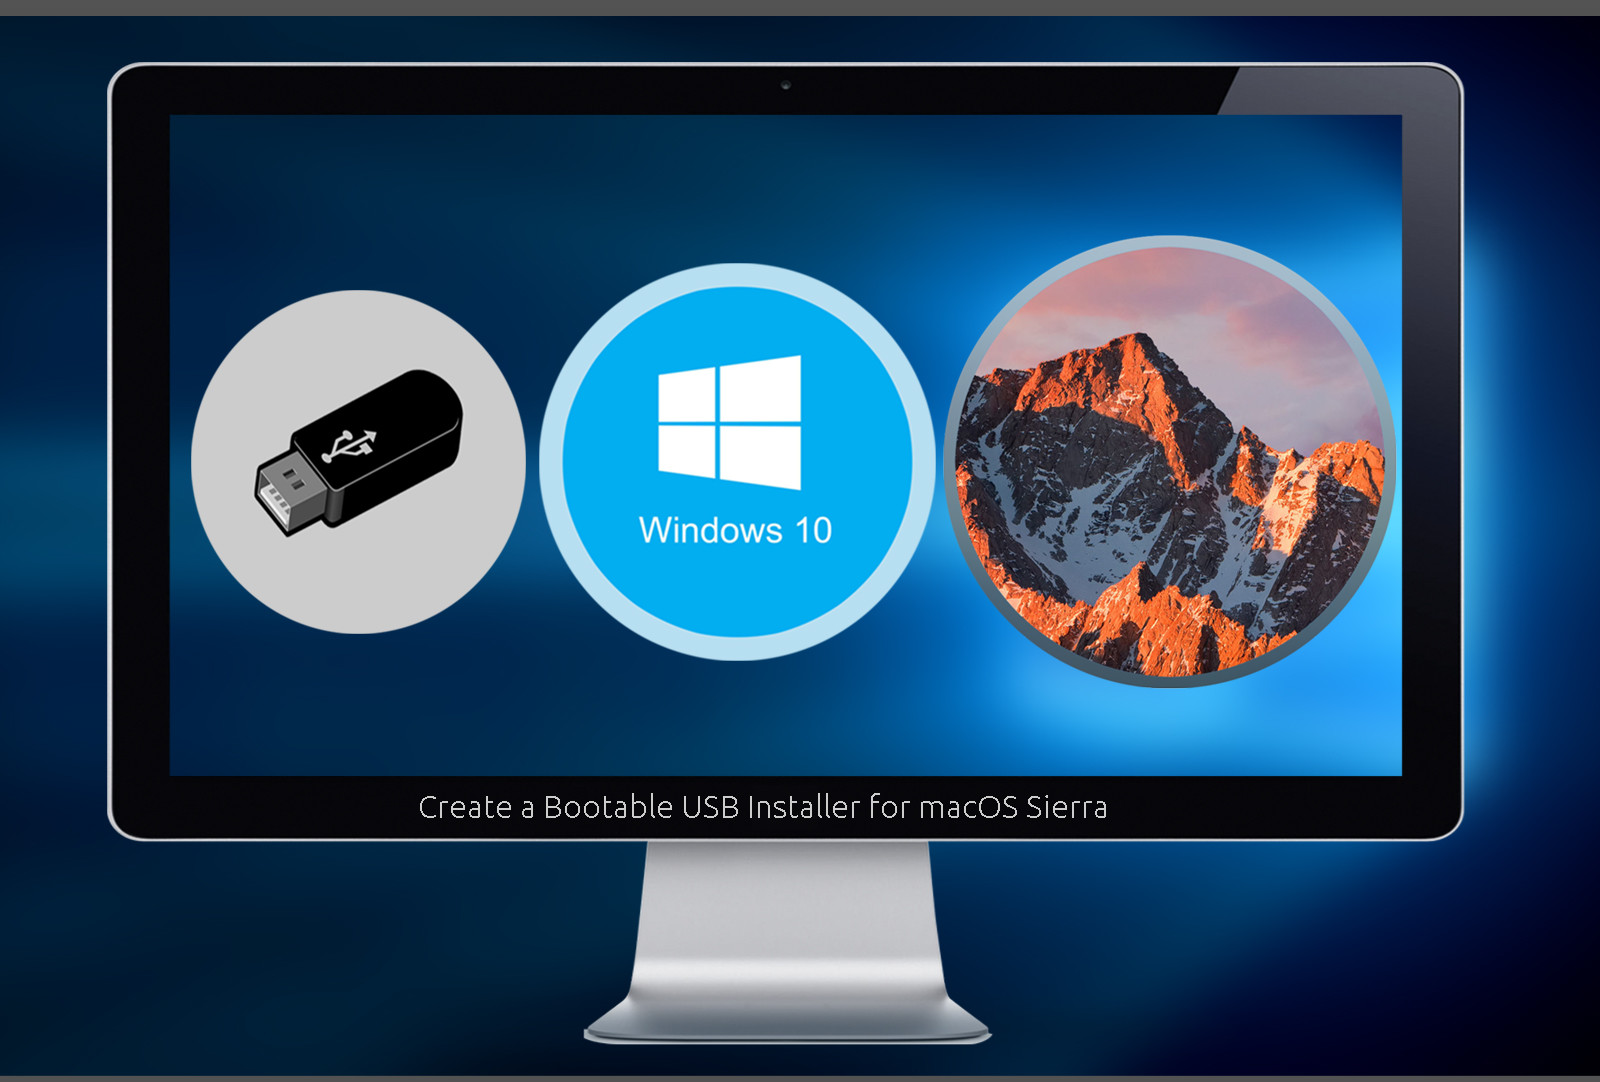 how to install mac os on windows